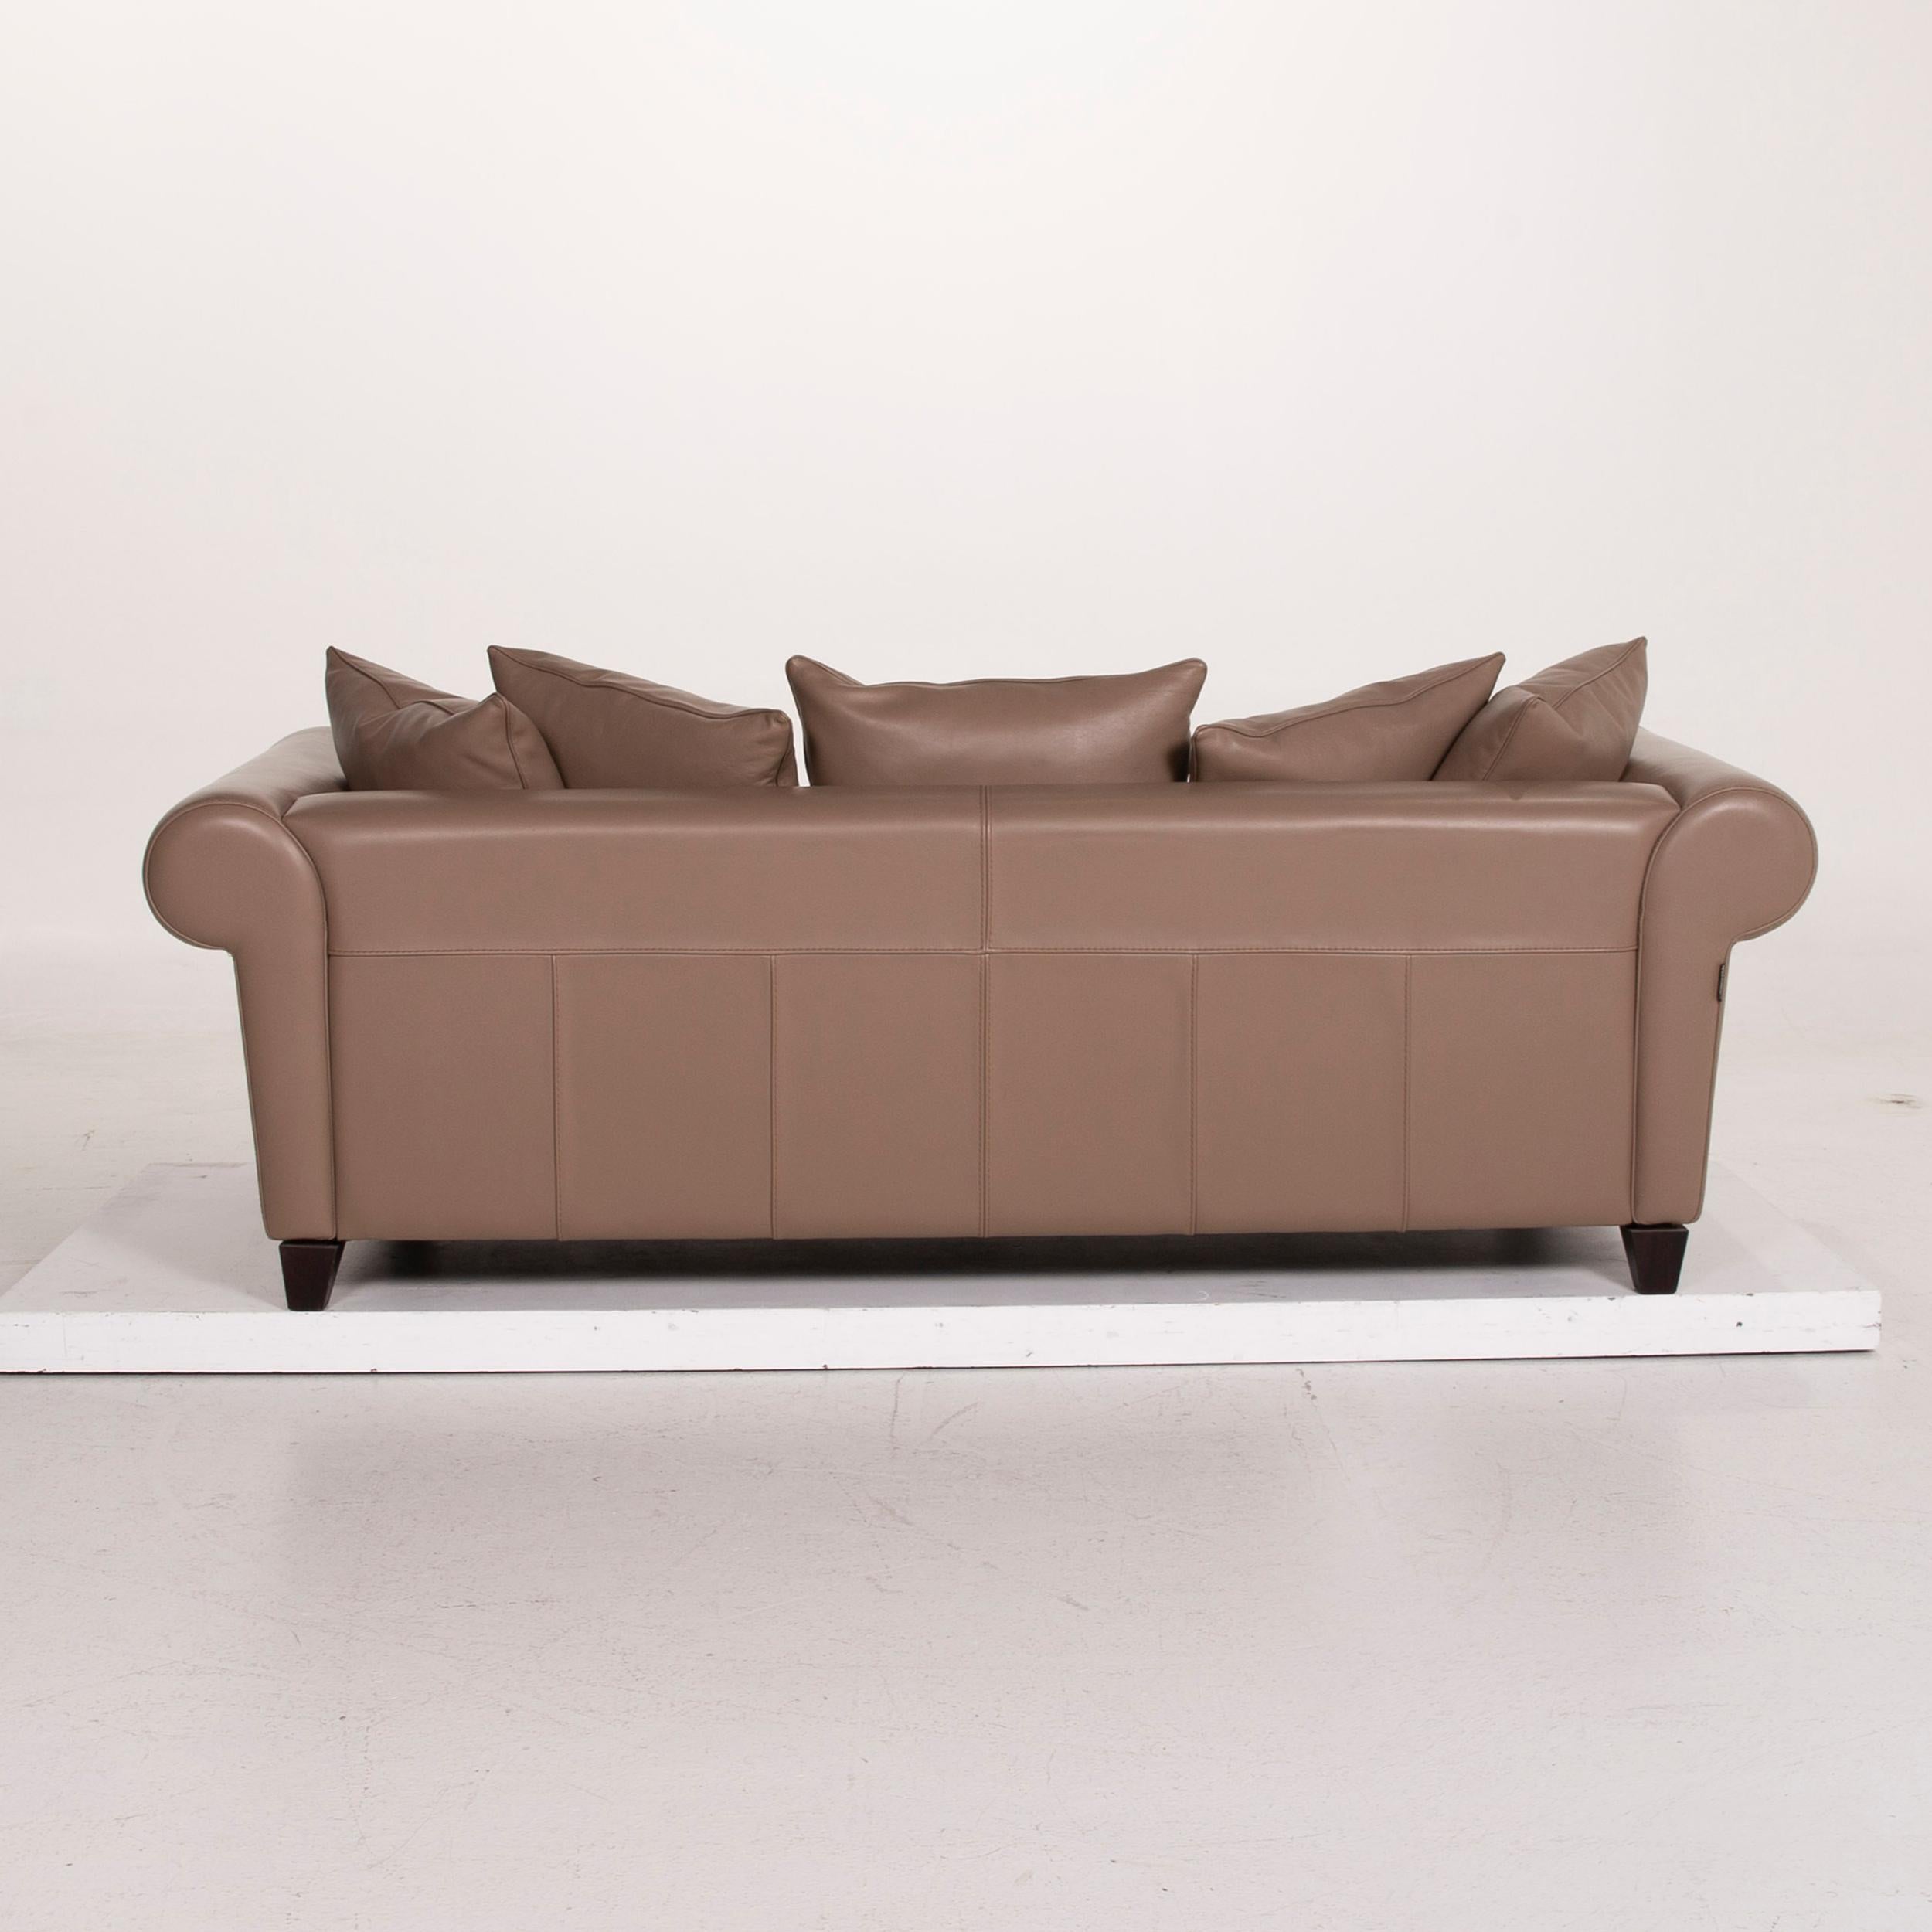 Roche Bobois Chester Chic Leather Sofa Brown Three-Seat For Sale 2